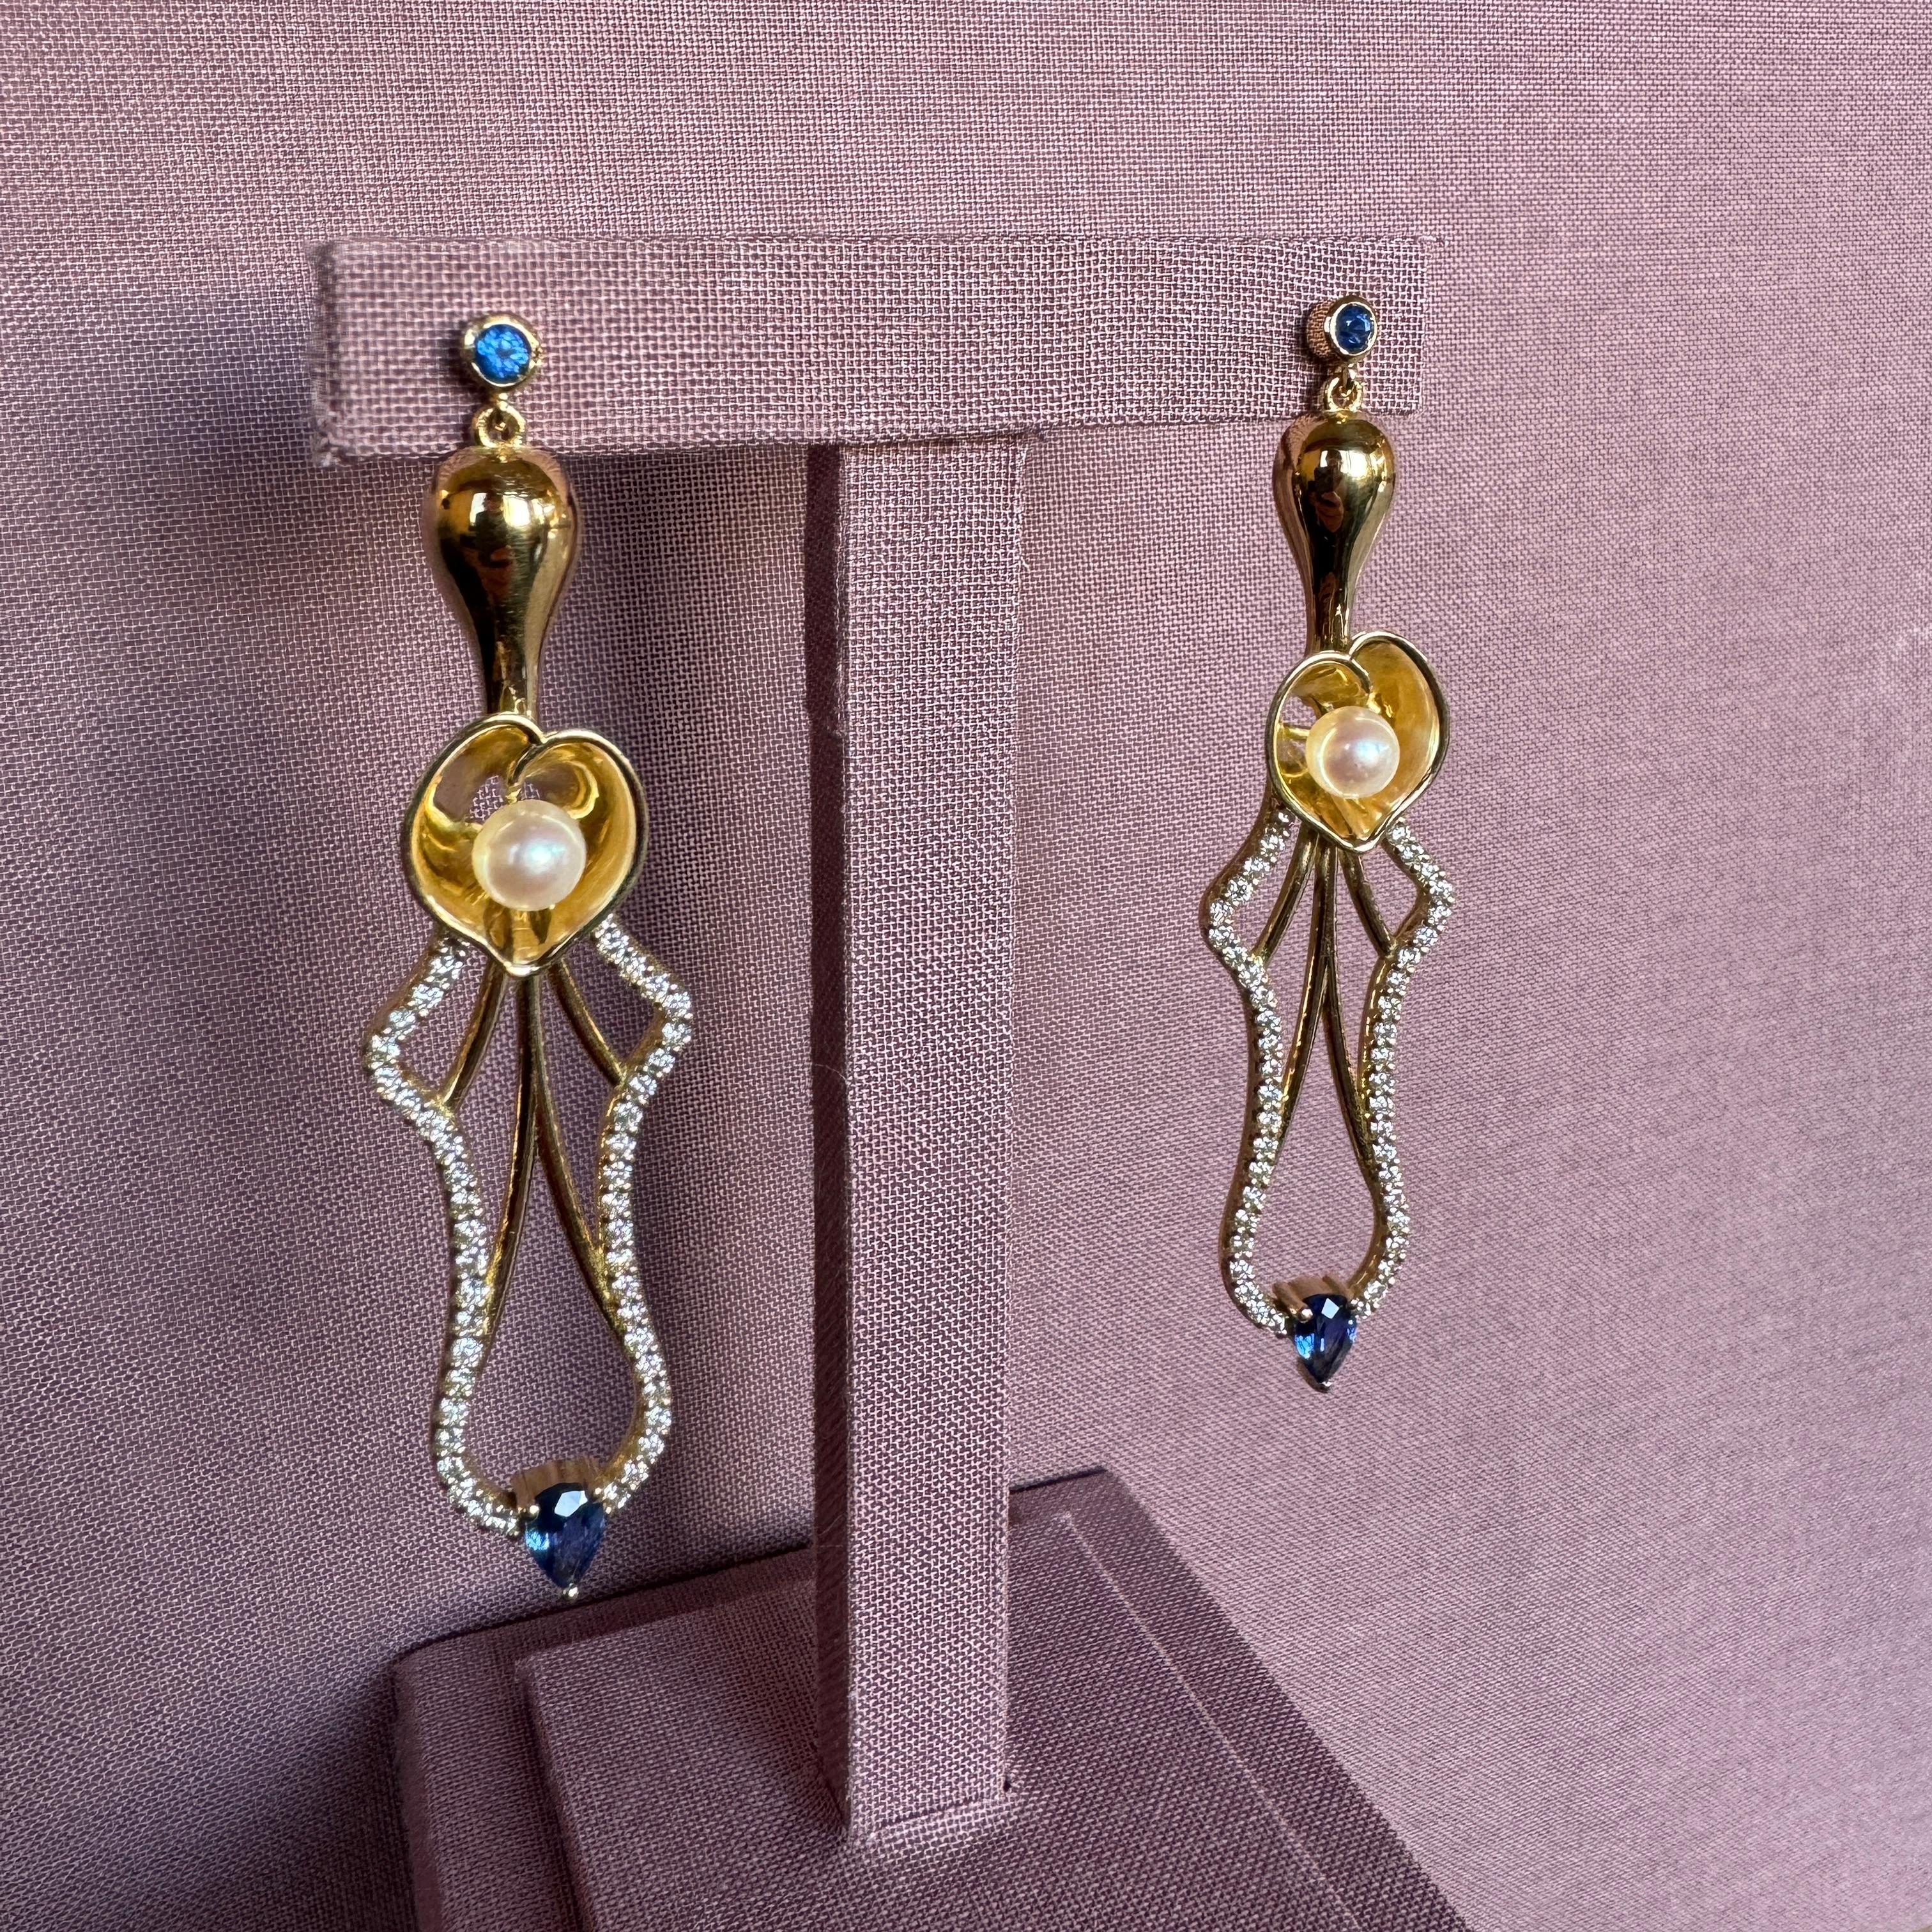 Pear Cut Lilies Earrings in 18 Karat Yellow Gold with Diamonds, Sapphires And Pearls